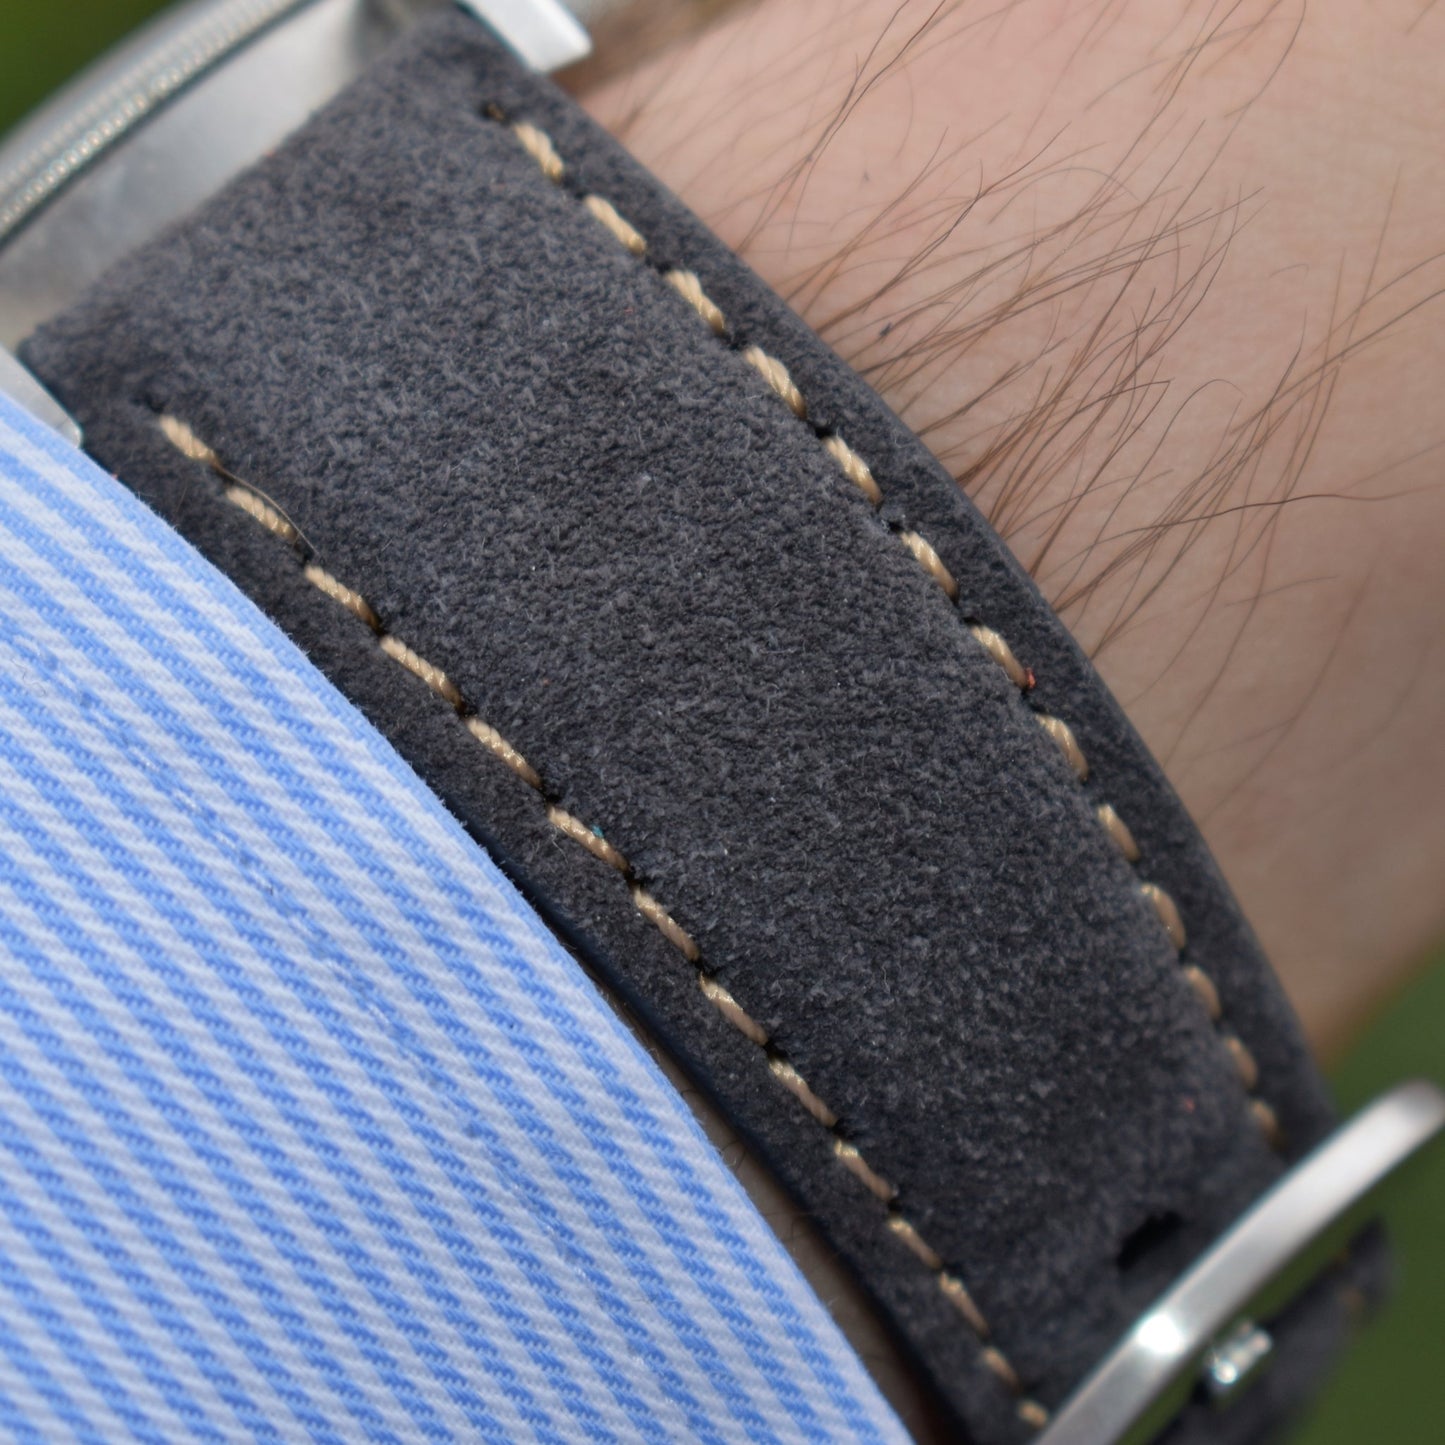 Wrist shot of the gunmetal grey suede apple watch strap. With contrast ivory stitching. Watch And Strap